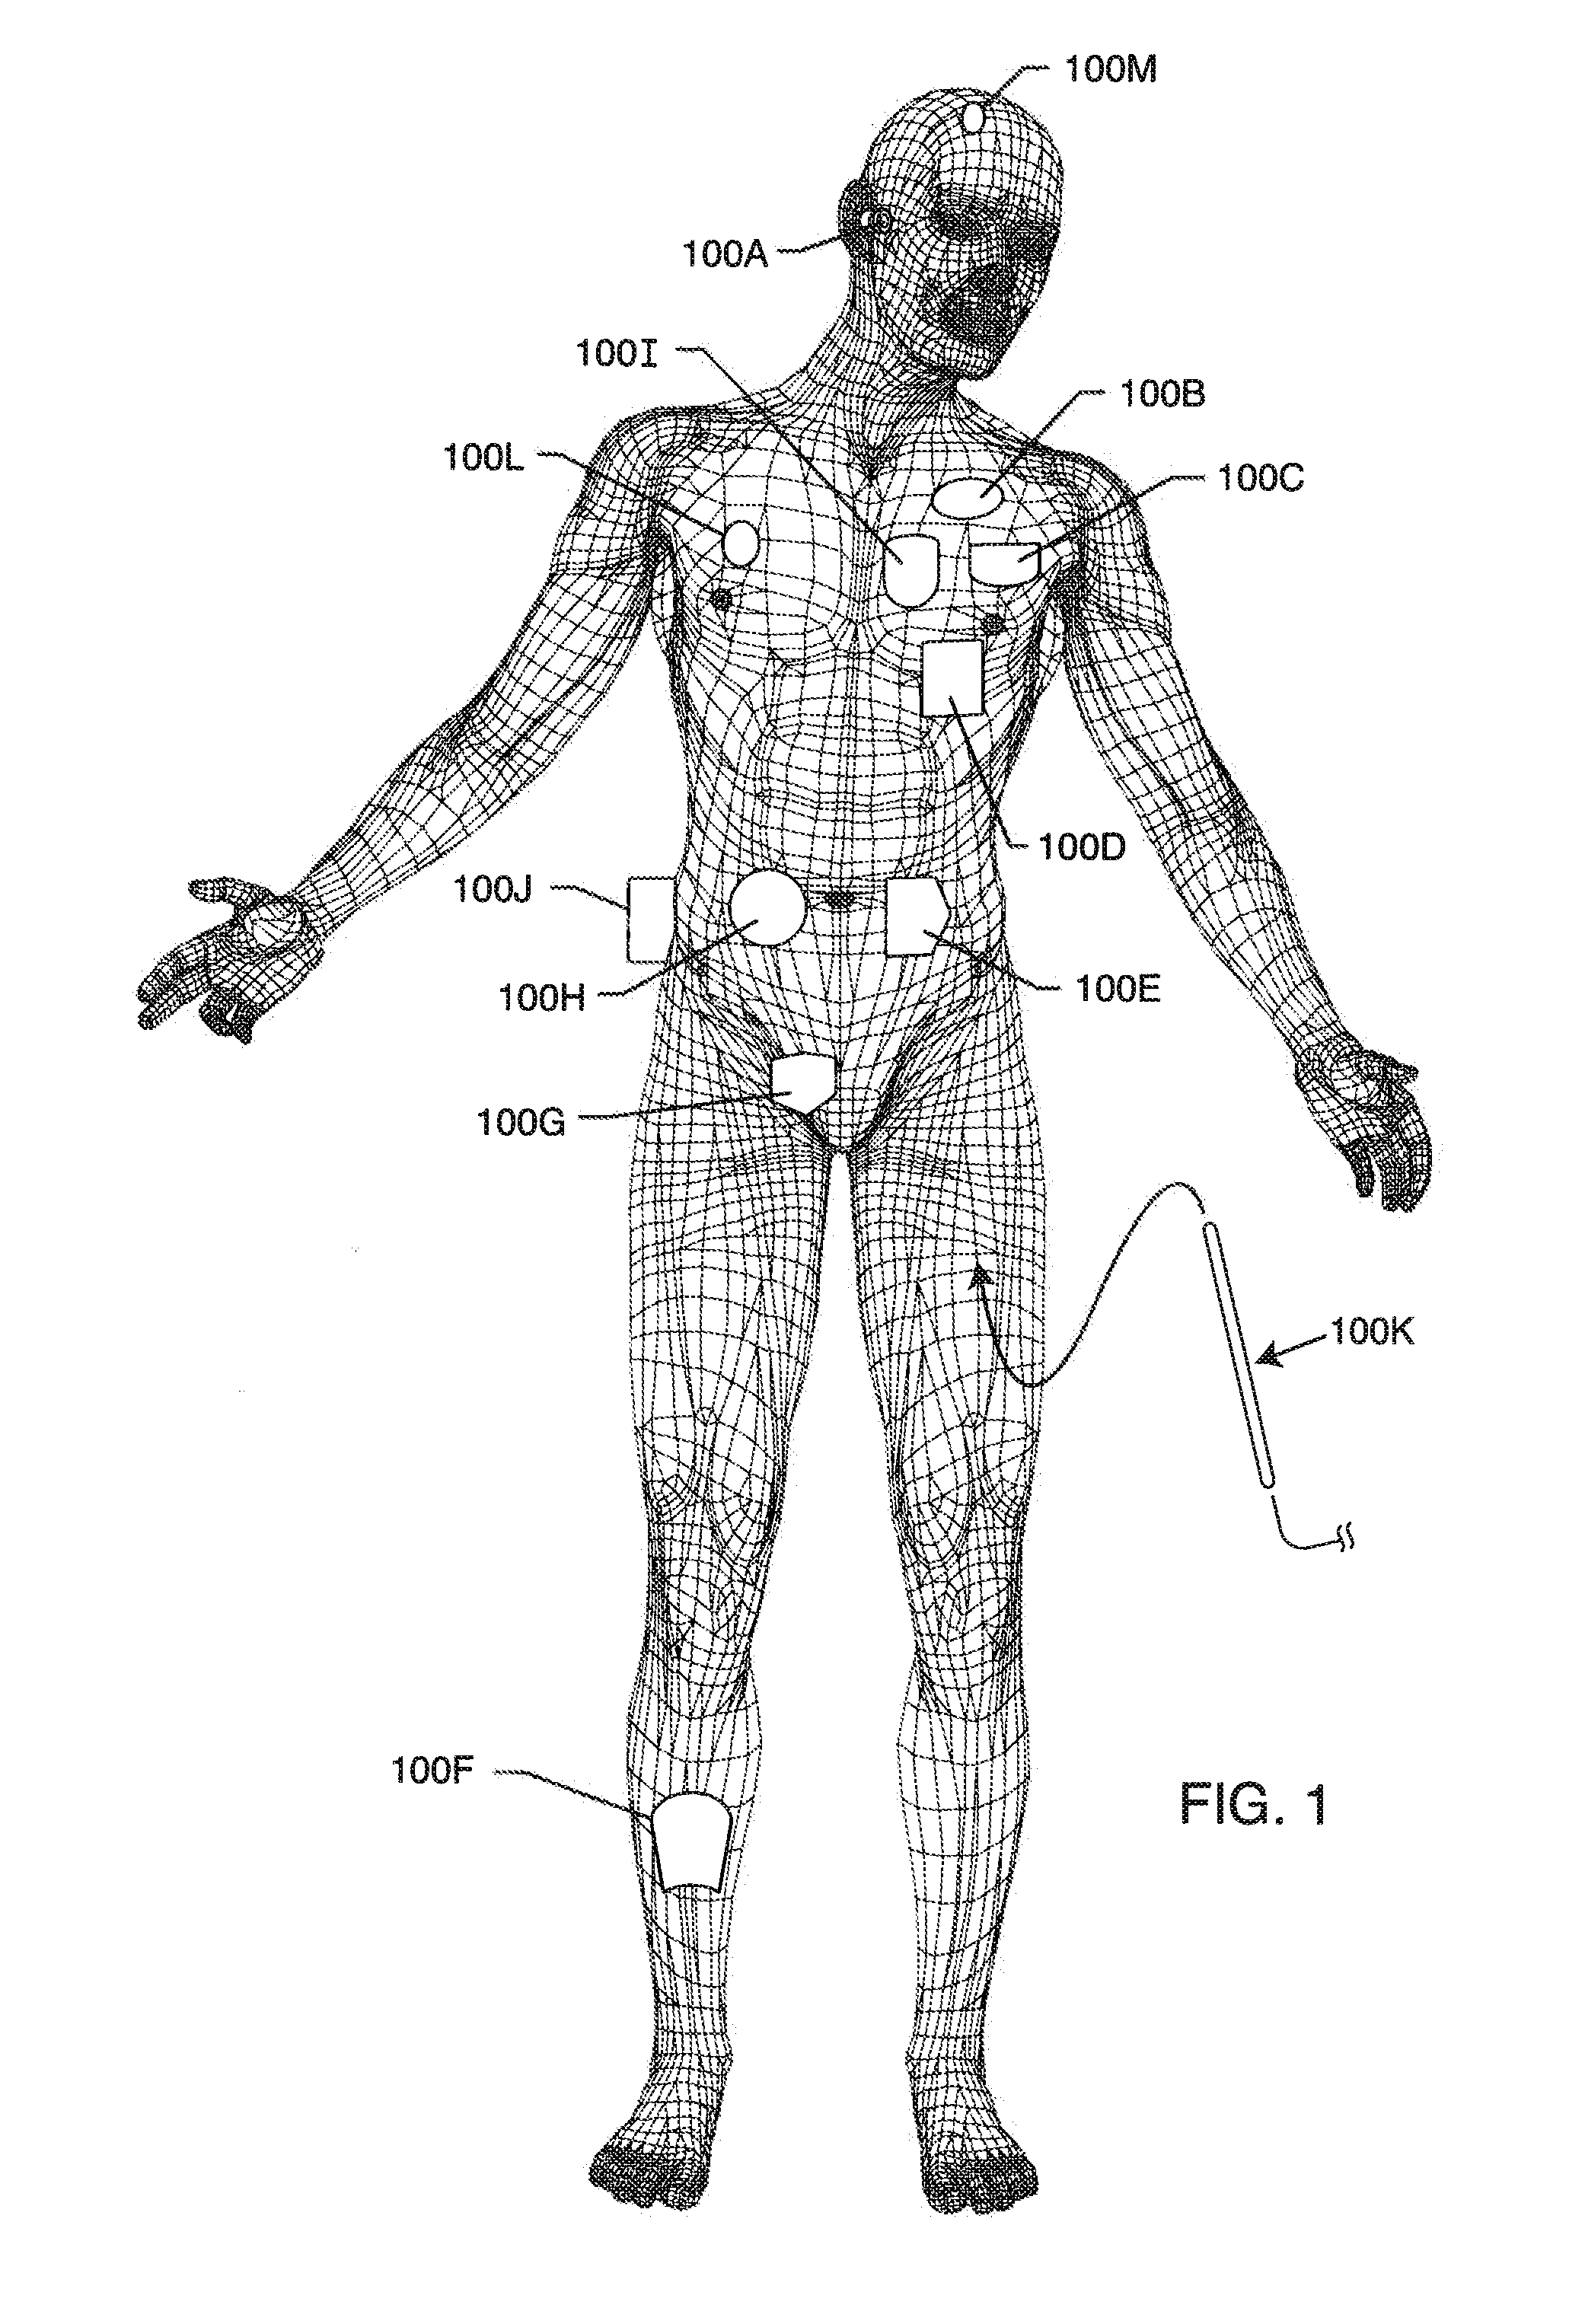 Elevated Hermetic Feedthrough Insulator Adapted for Side Attachment of Electrical Conductors on the Body Fluid Side of an Active Implantable Medical Device